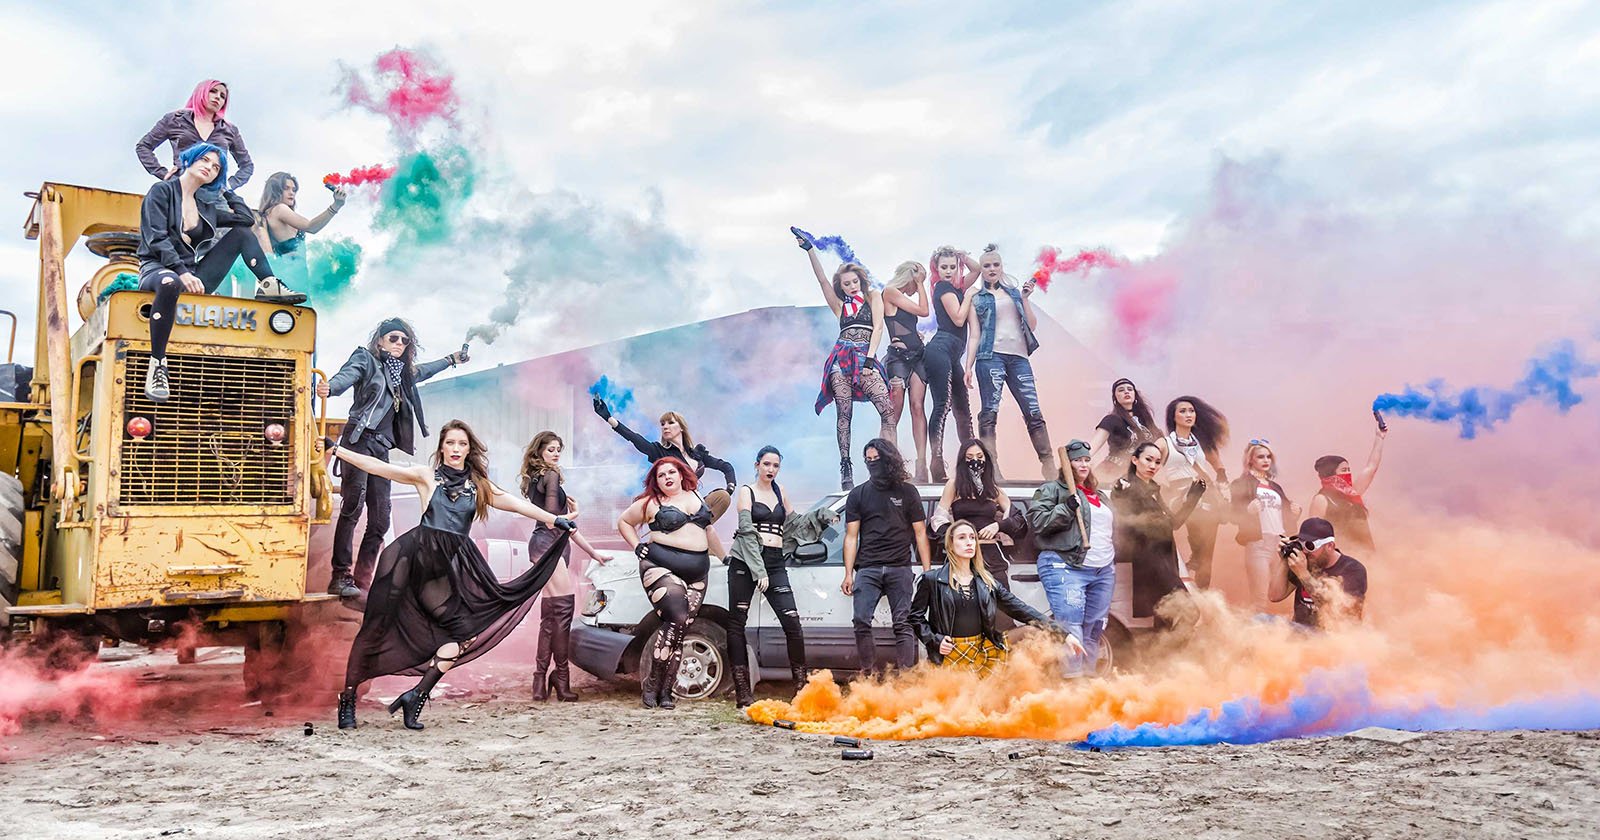 Smoke Bomb Photos What I Learned Shooting Models In A Junkyard